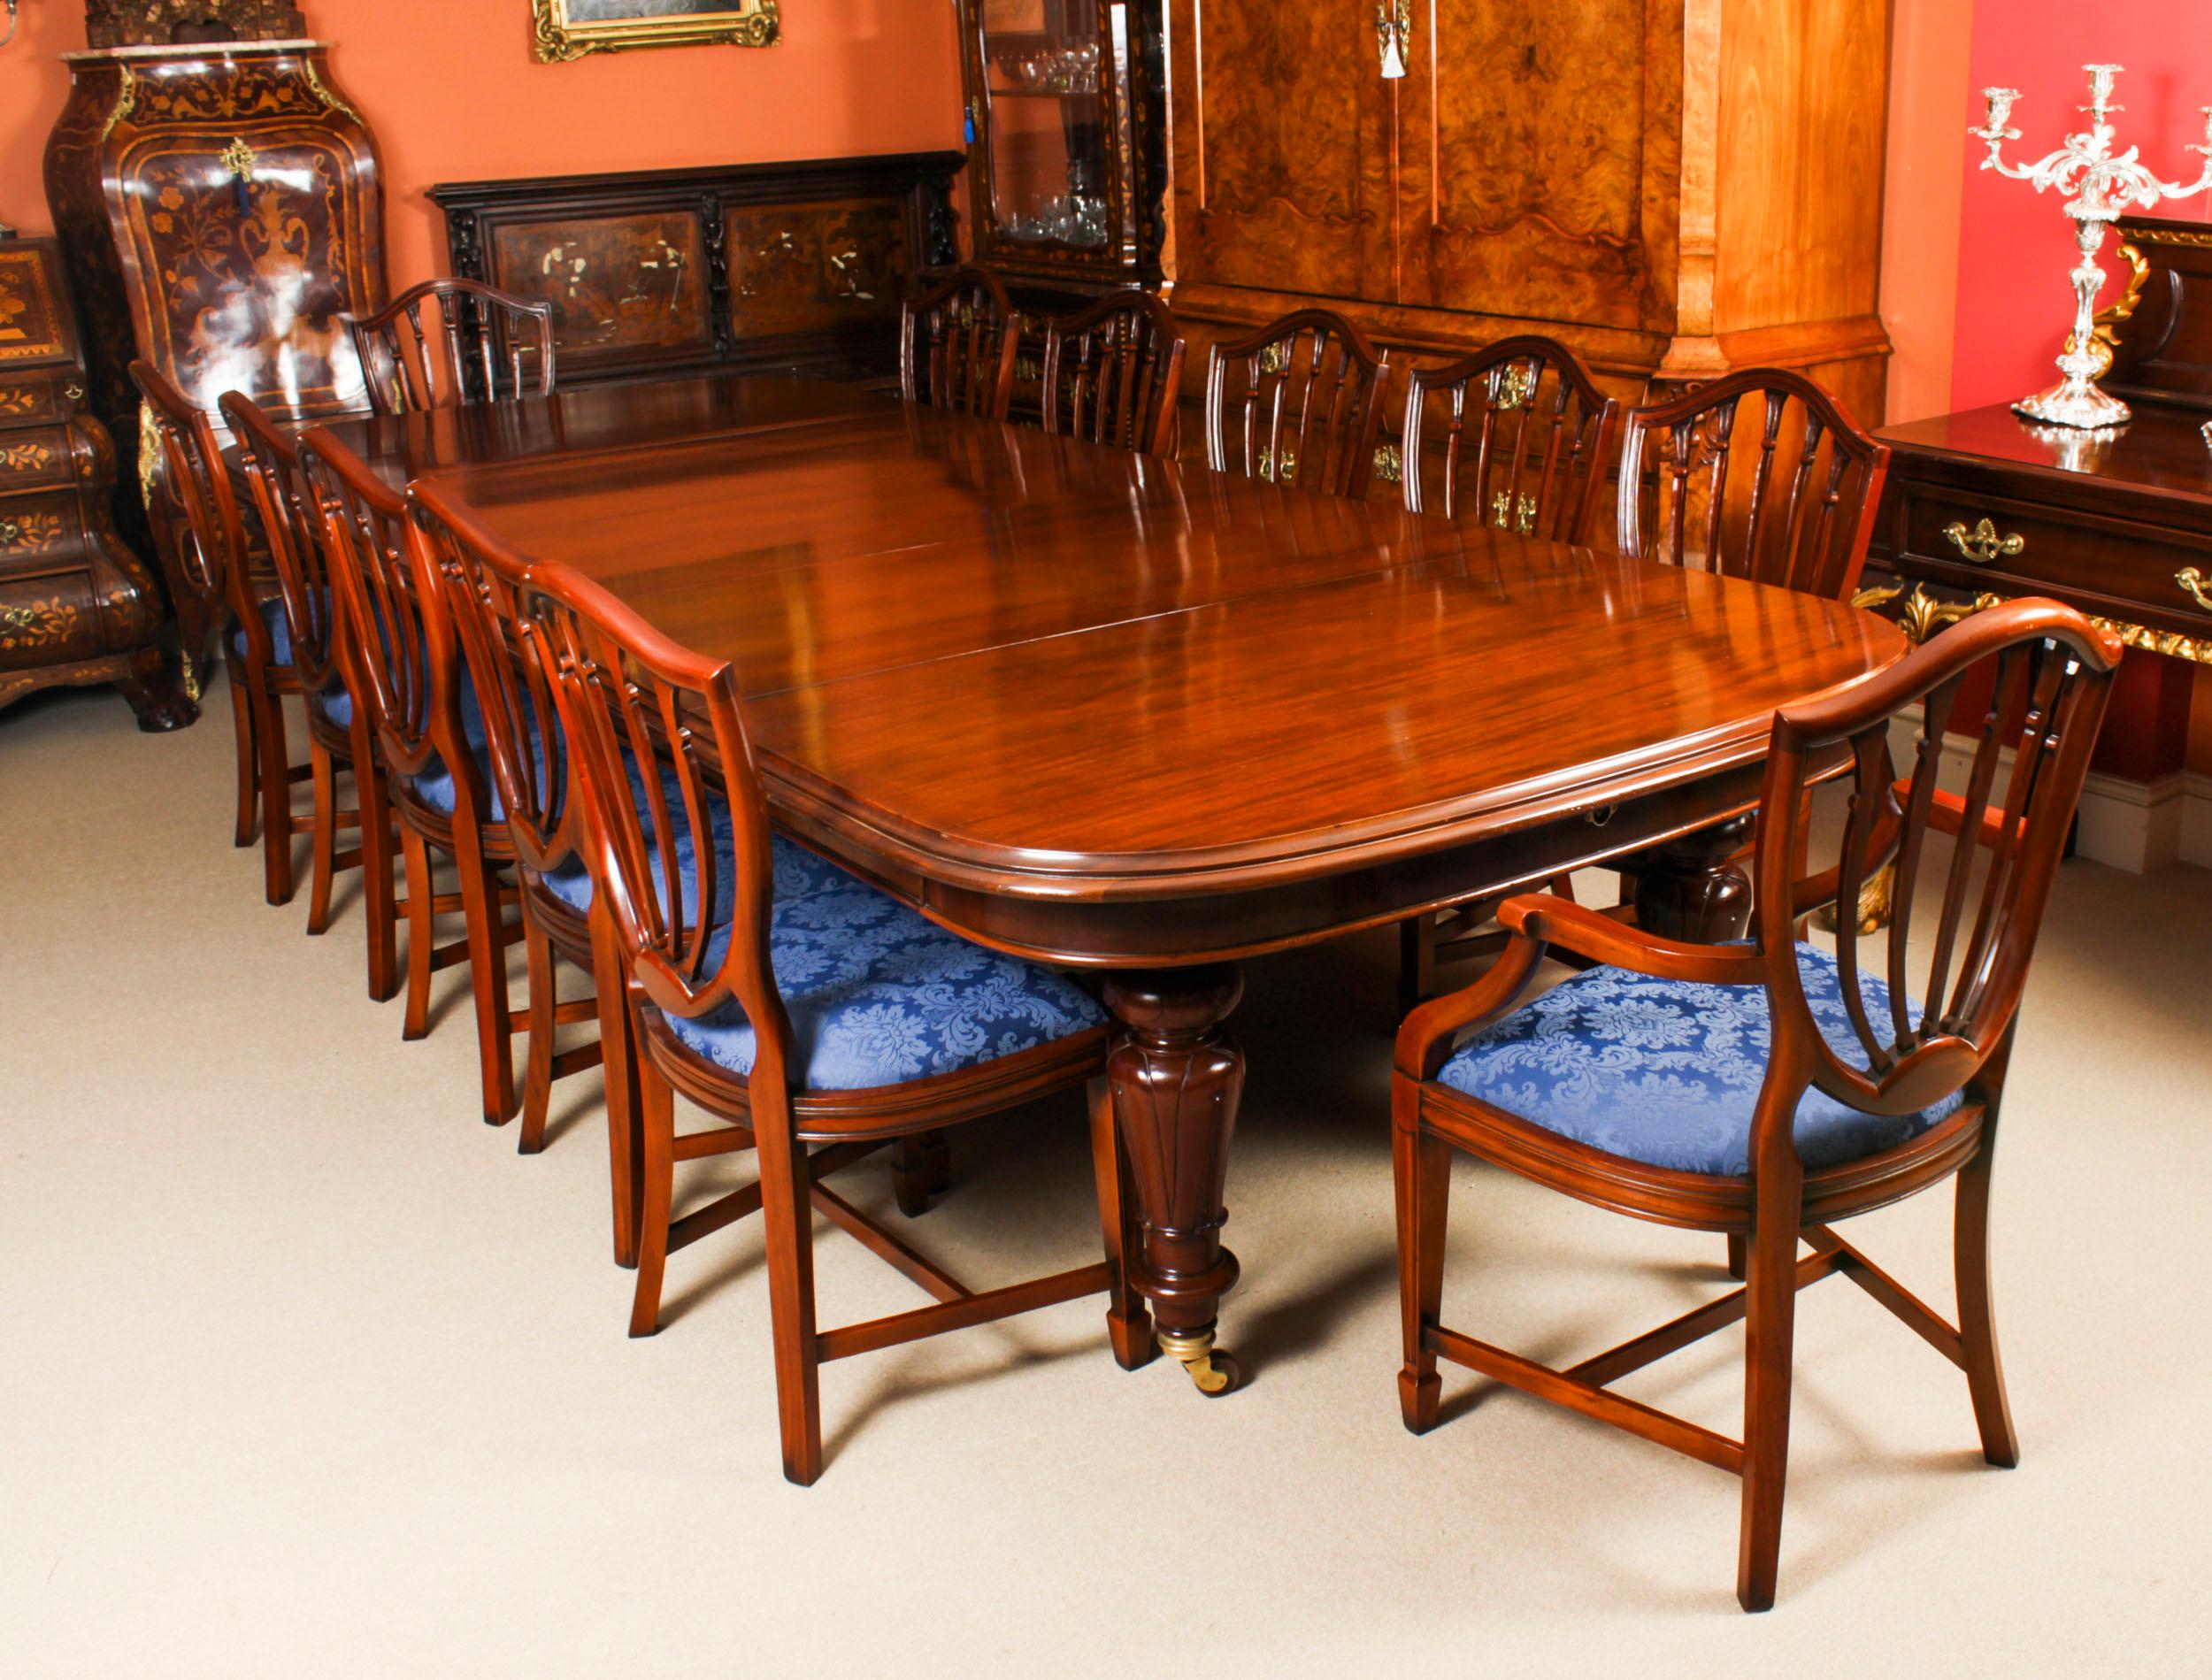 This is a magnificent antique Victorian solid mahogany D-end dining table which can seat twelve diners in comfort and is also ideal for use as a conference table, C1850 in date.
 
This beautiful table is in stunning flame mahogany and has three